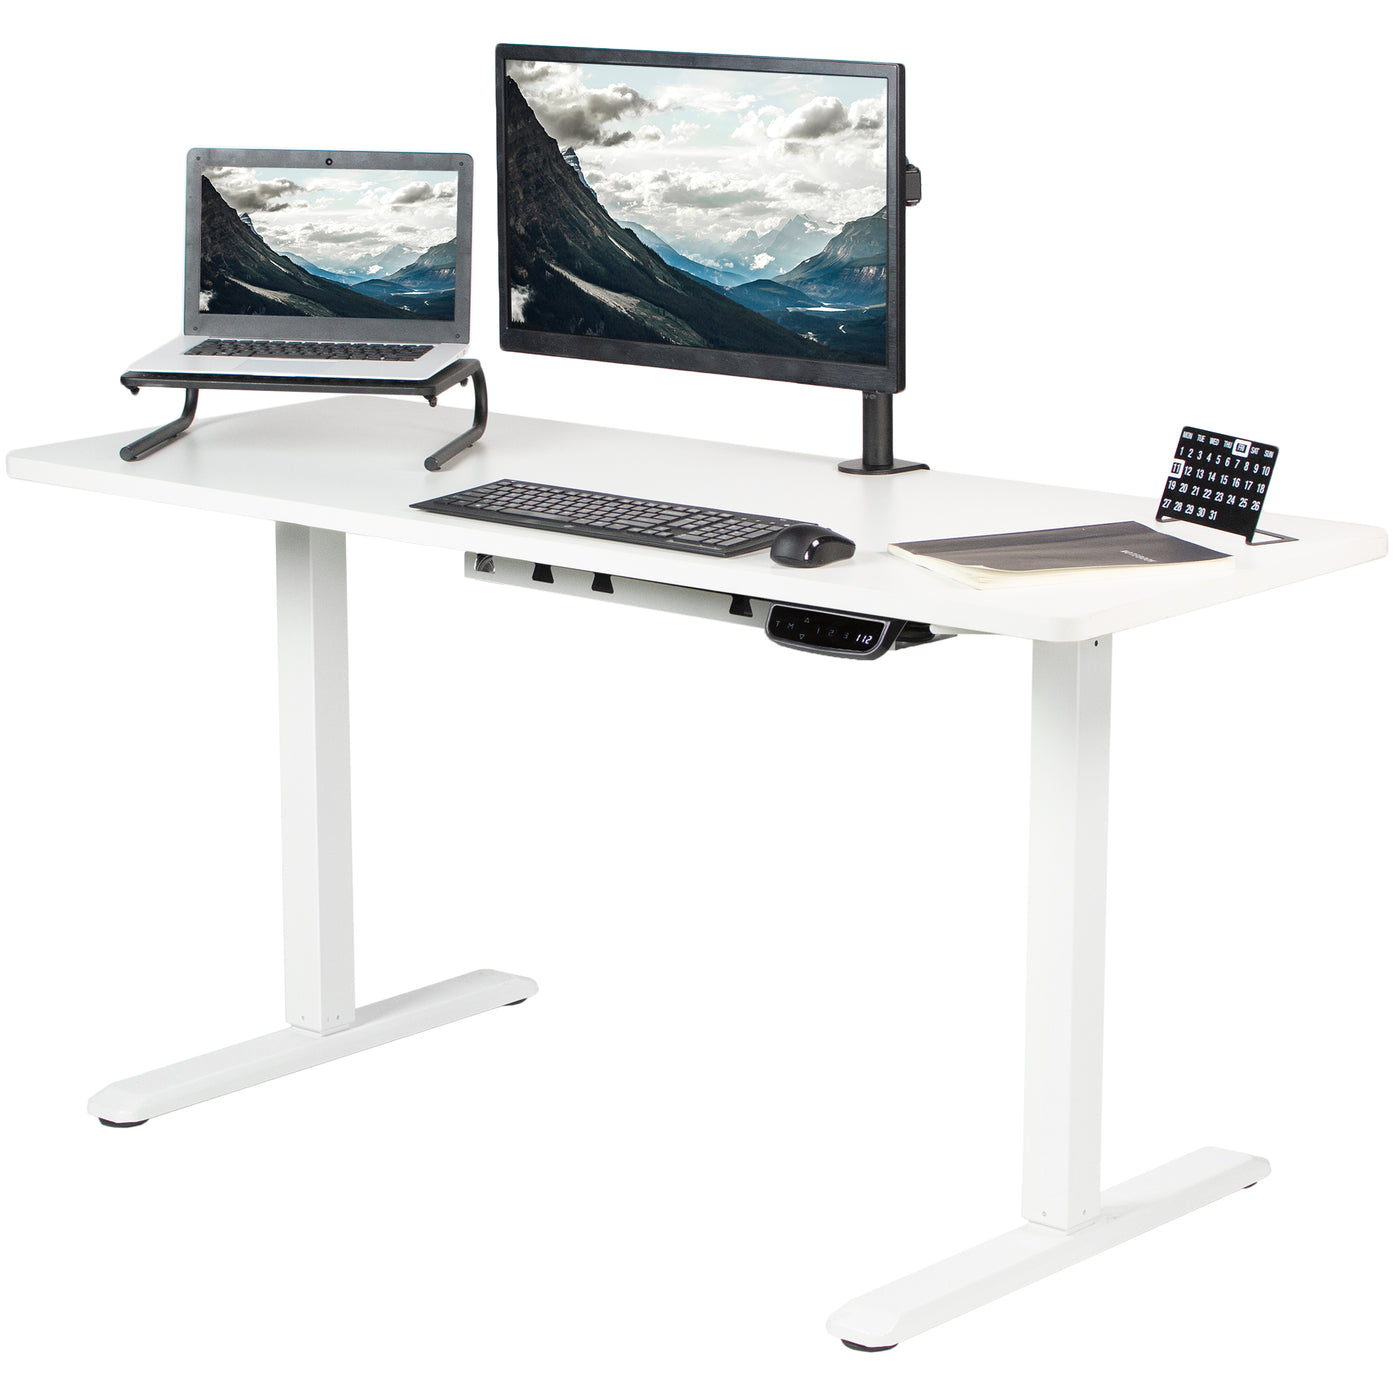 Dual Monitor Stand - Ergonomic Free Standing Dual Monitor Desktop Stand for  two 24 (17.6lb/8kg) VESA Mount Displays - Synchronized Height Adjustable